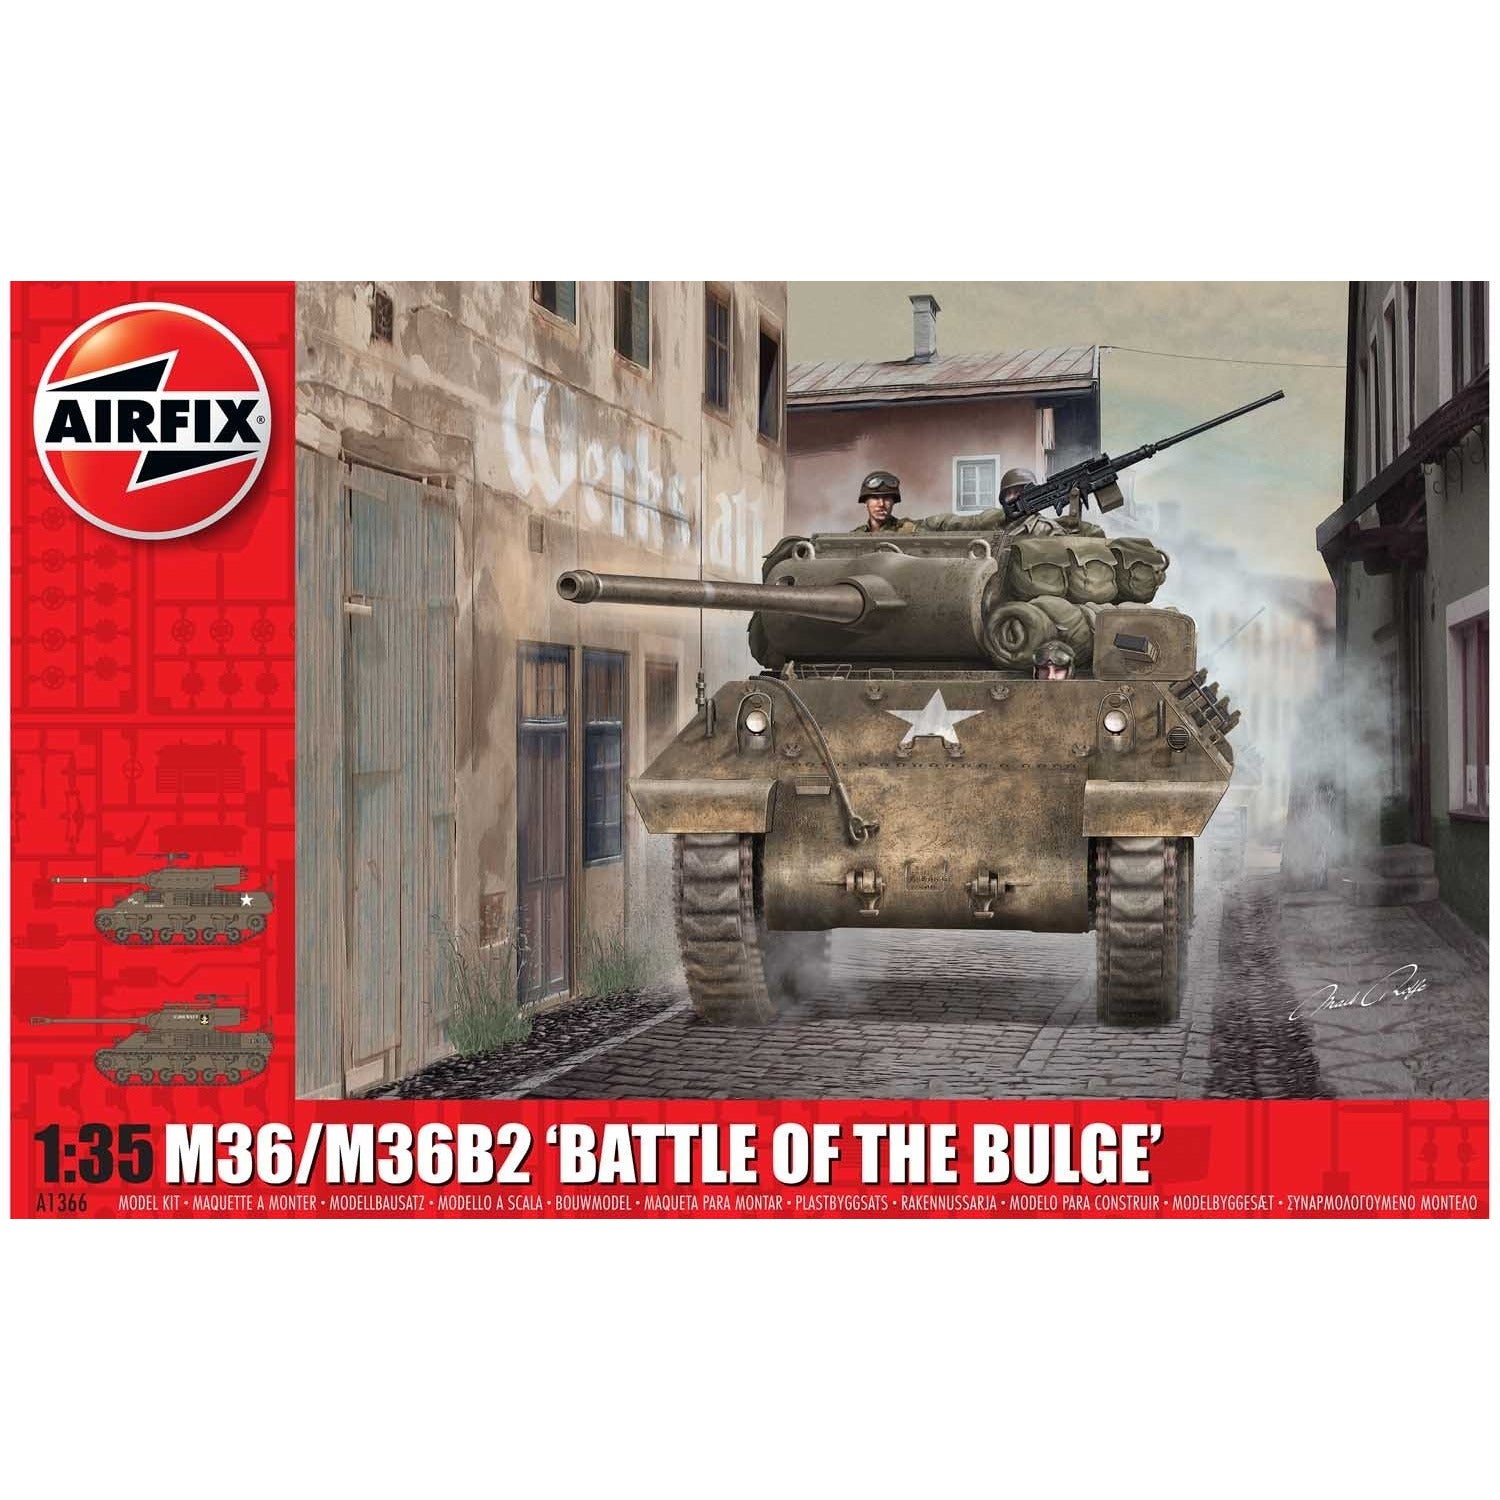 M36/M36B2 Battle of the Bulge 1/35 by Airfix